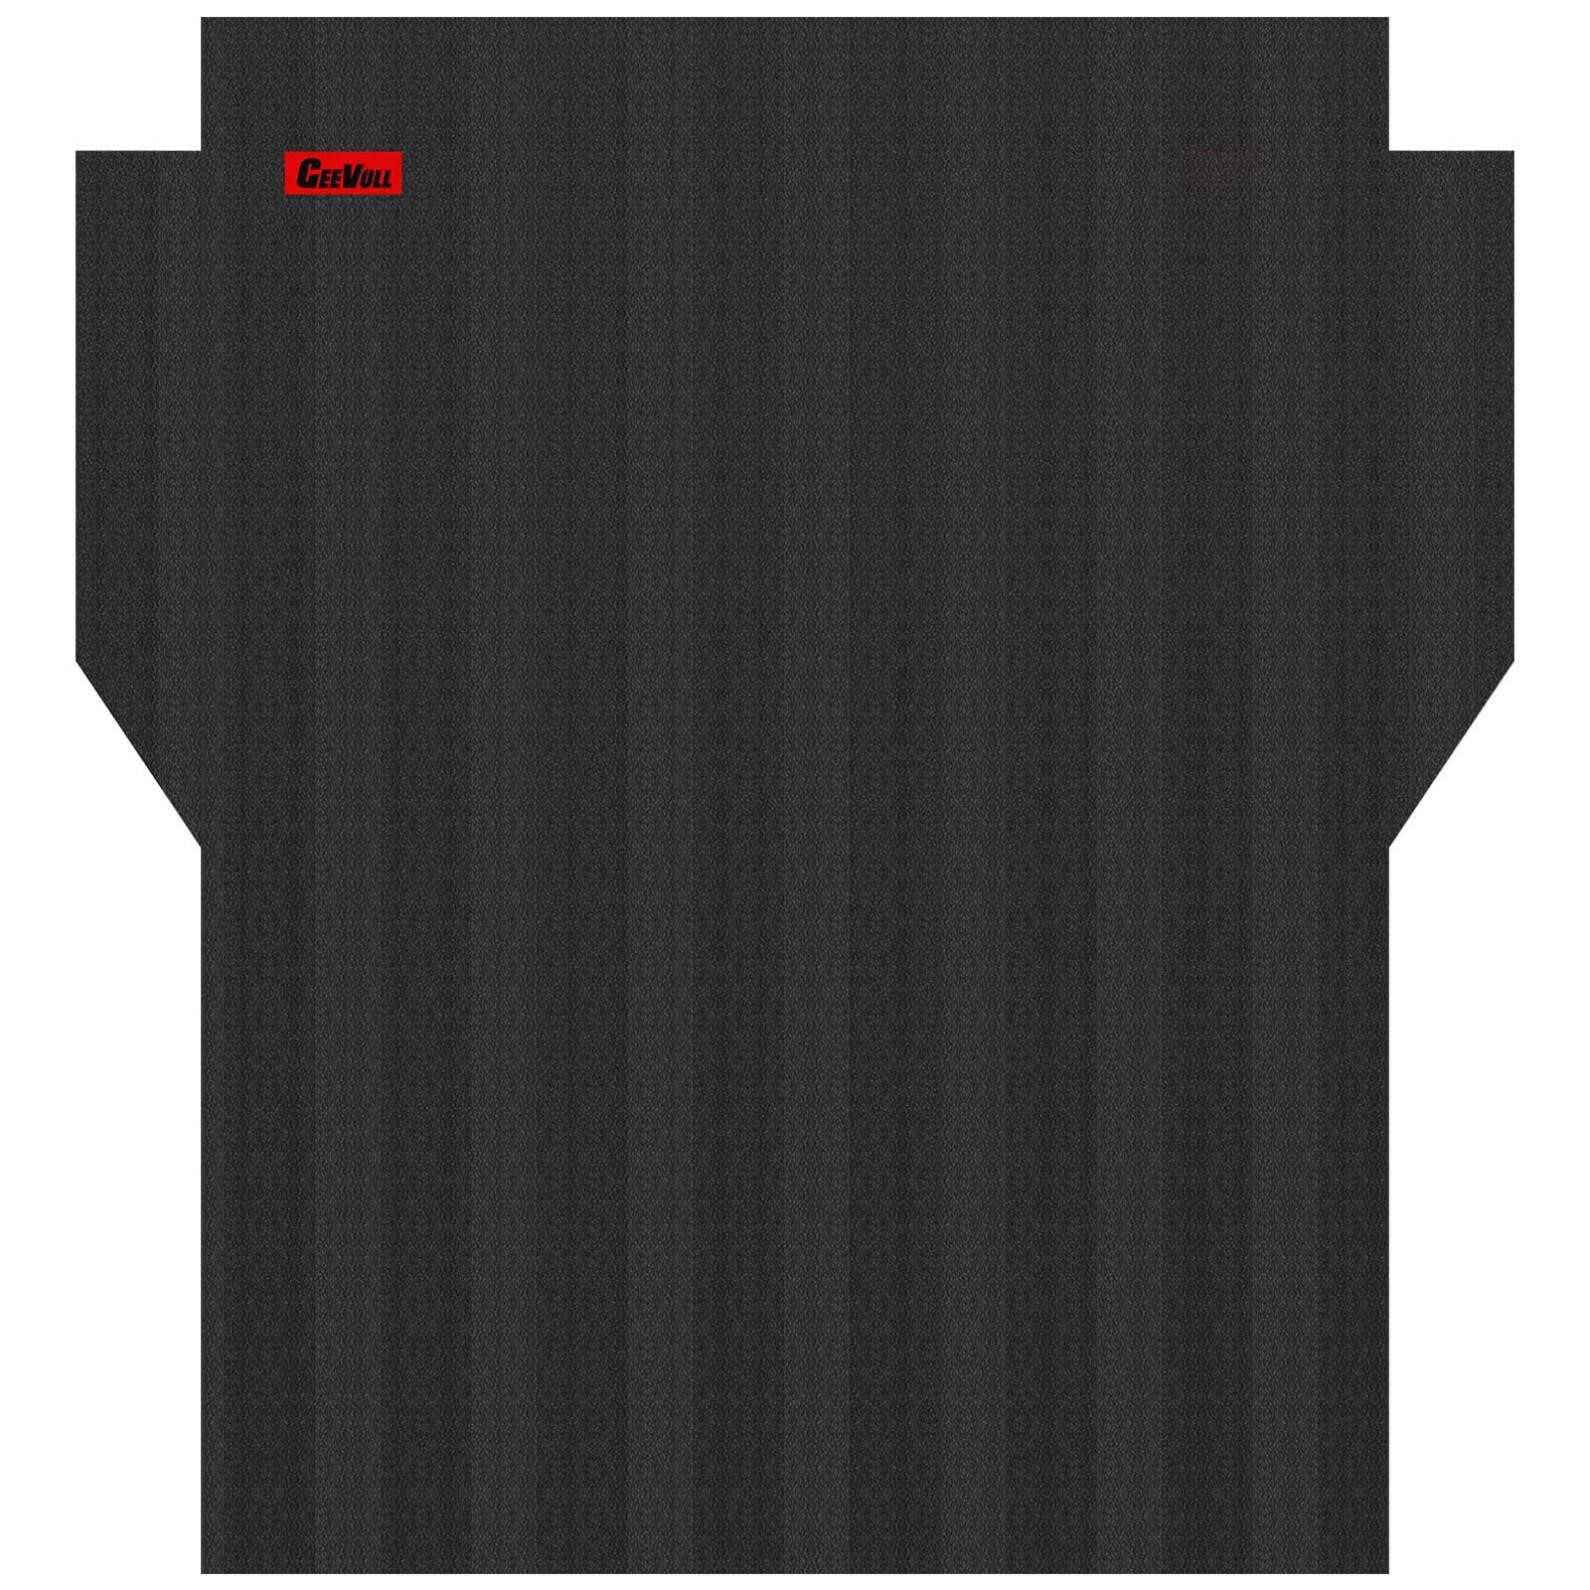 GEEVOLL Heavy Duty Rubber Truck Bed Mat for 2005-2